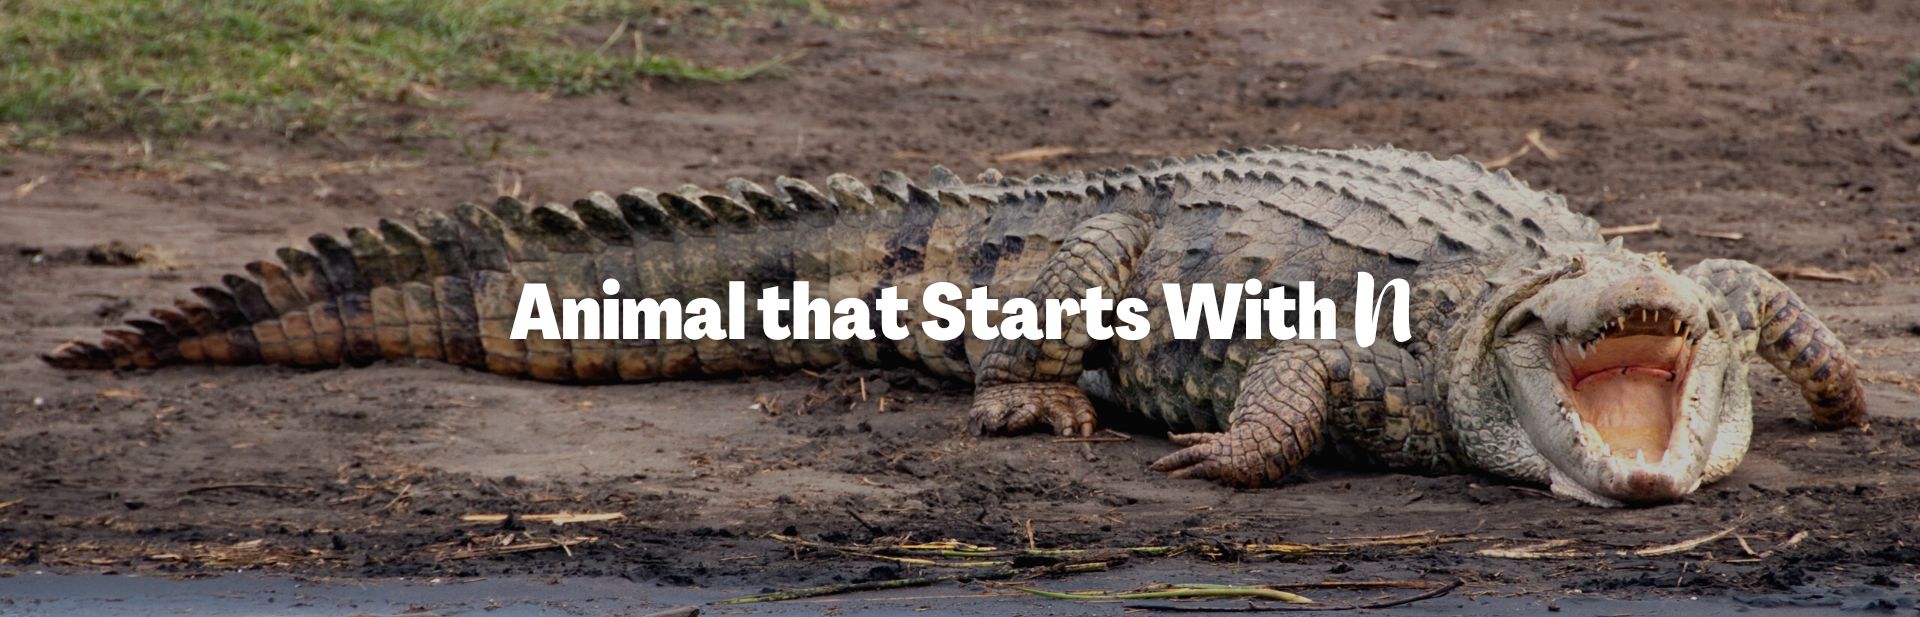 Navigating Nature’s N: A Look at Some of the Most Fascinating Animals That Start With N